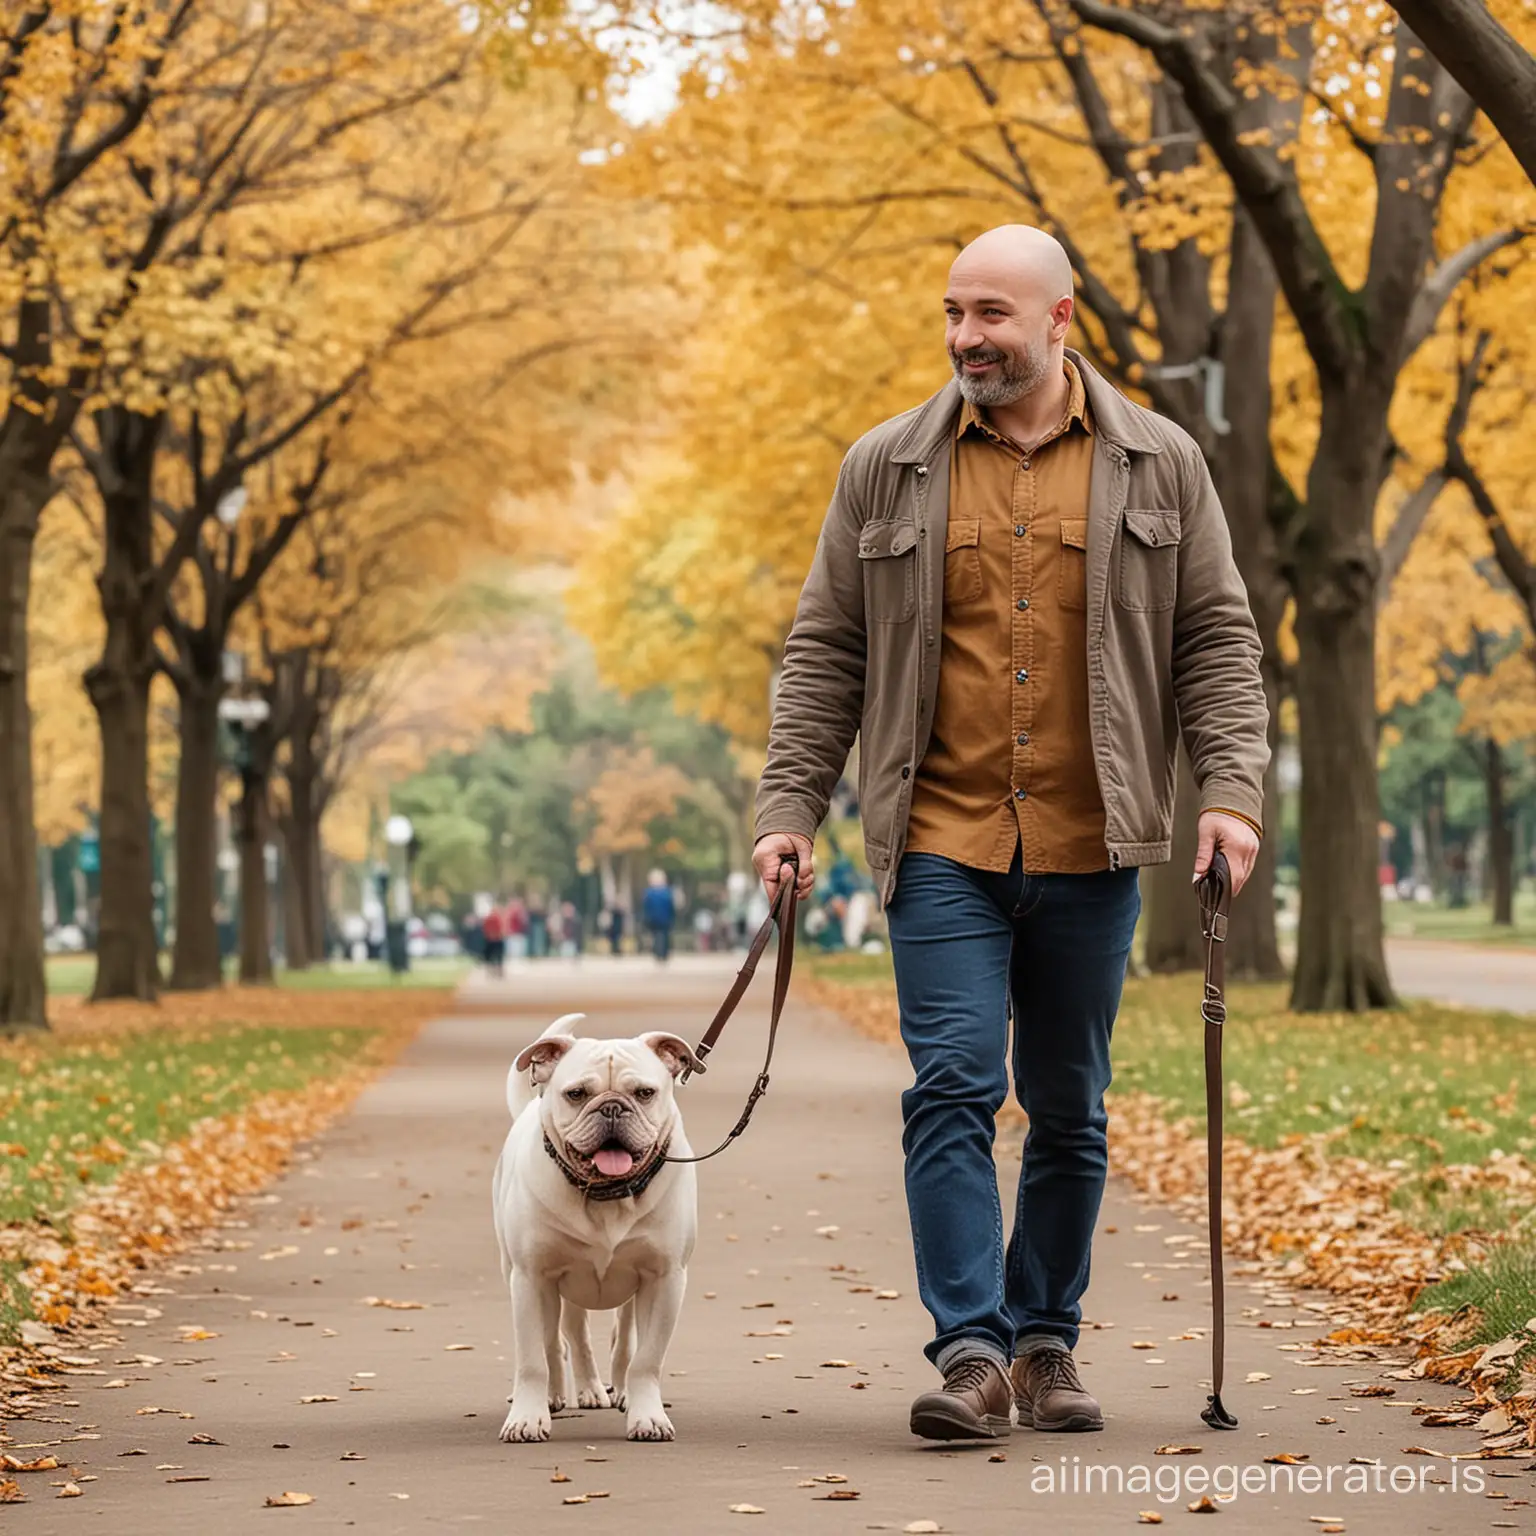 Bald man with small beard taking a dog for a walk in the park